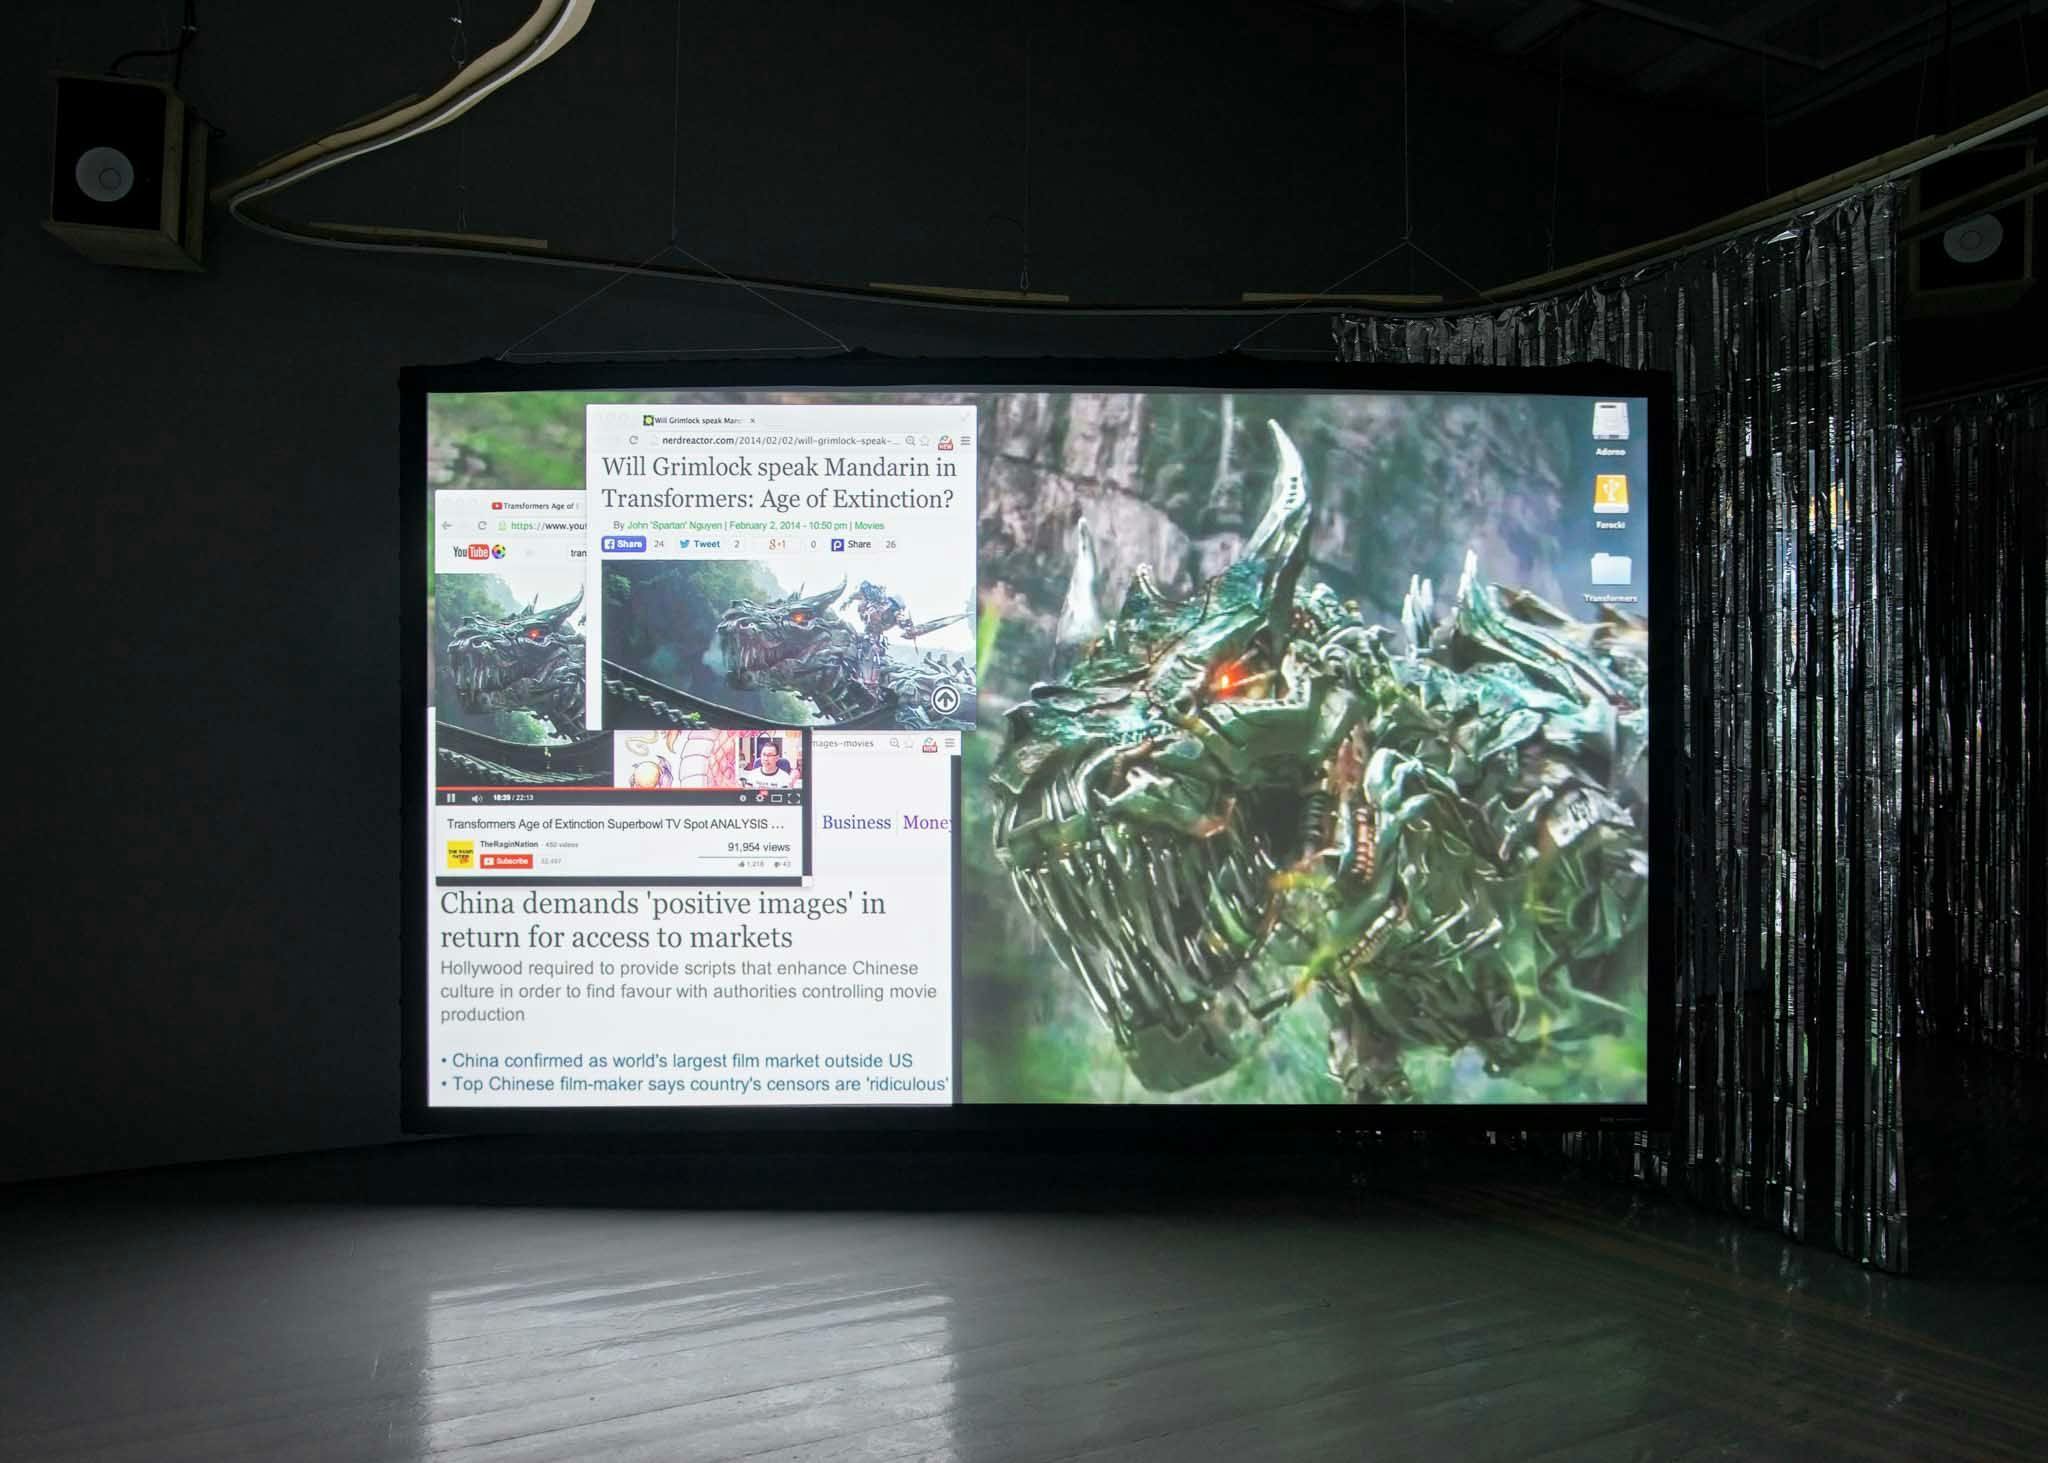 A bright projection screen in a gallery shows news clippings and a monster